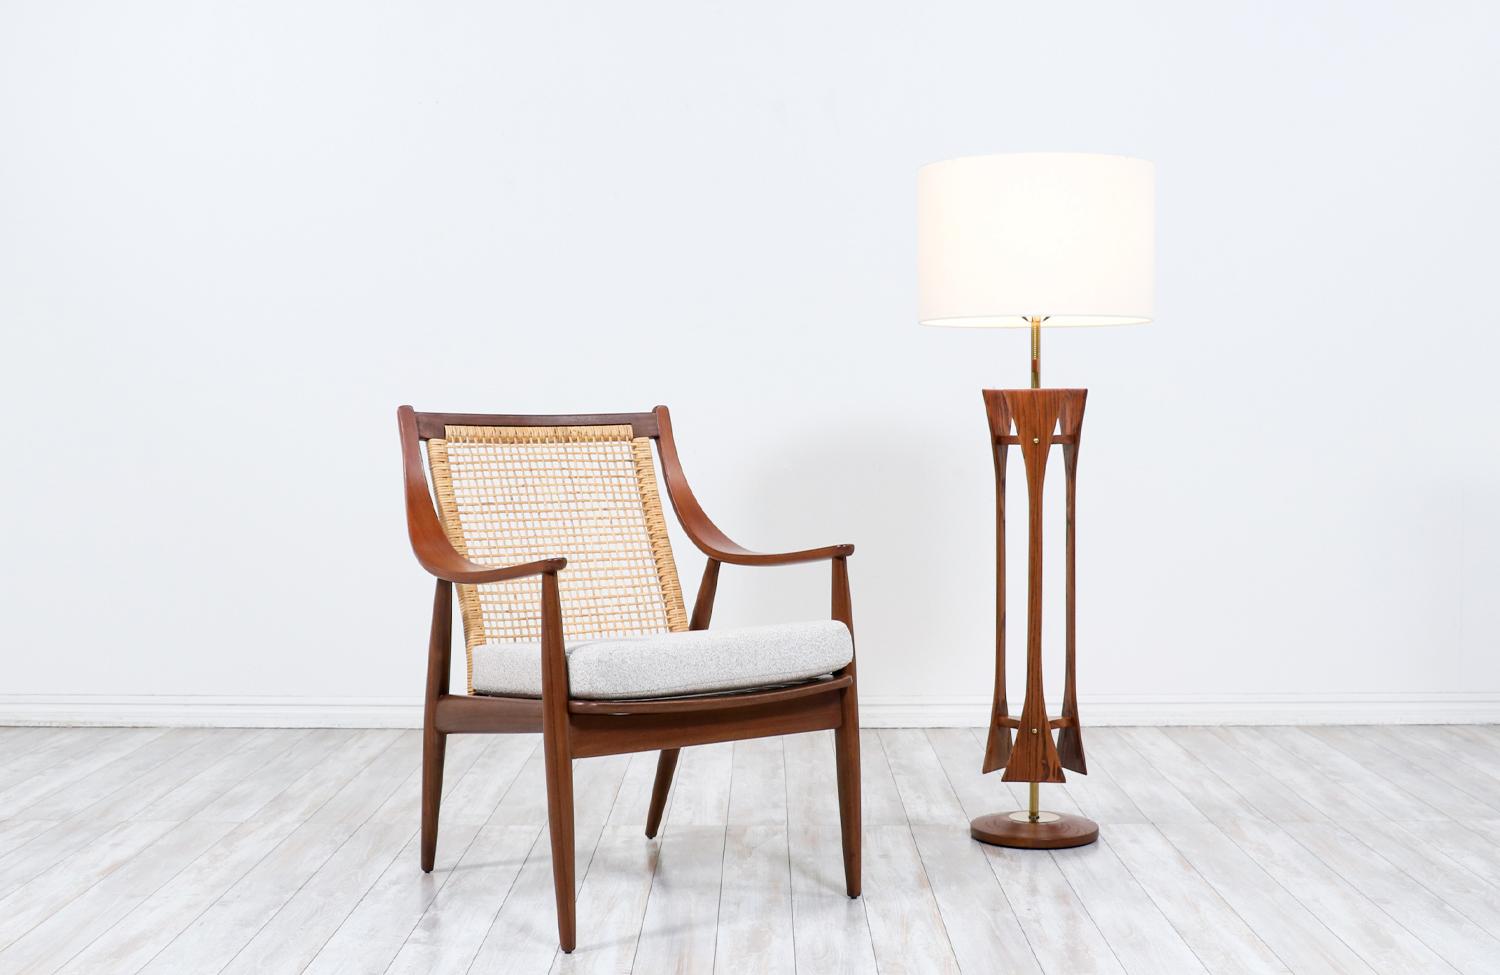 Mid-Century Modern Walnut Sculpted Floor Lamp with Brass Accents

Dimensions

52in H x 10in W 10x in D

Lamp Shade:  12in H x 18in W
________________________________________________________
Transforming a piece of Mid-Century Modern furniture is